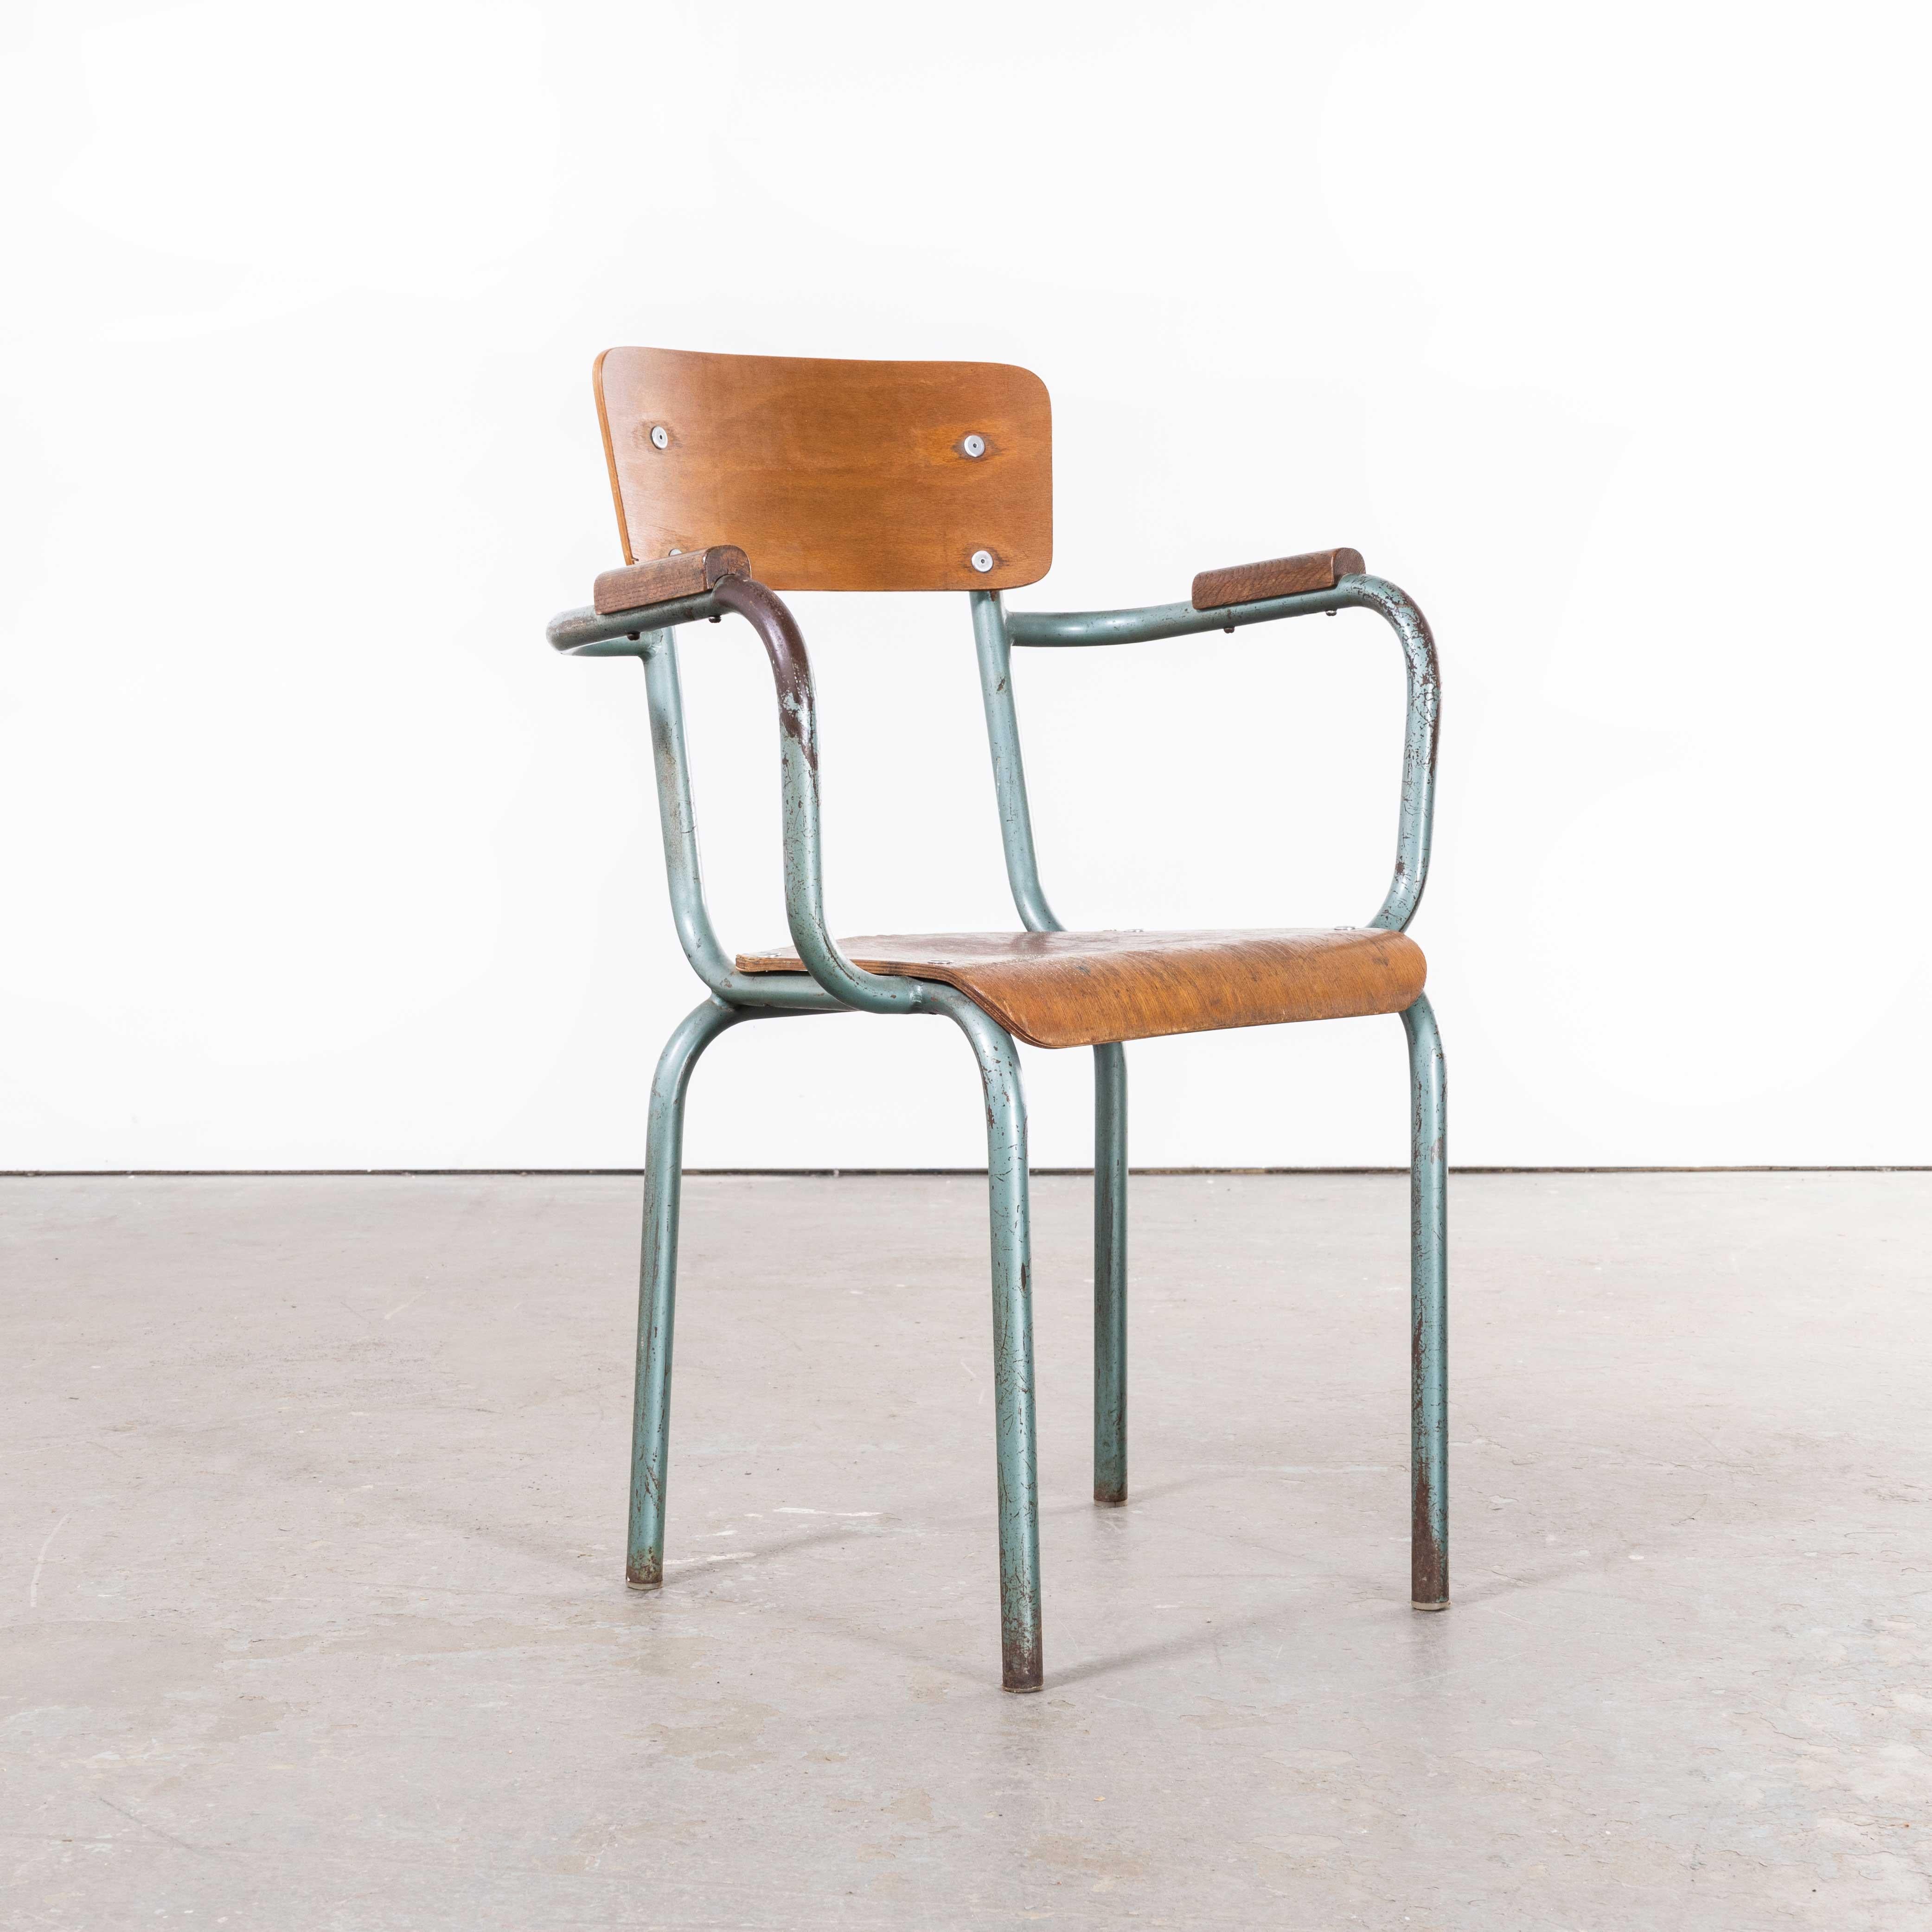 1950s Original French Mullca armchair – desk chair
1950s Original French Mullca armchair – desk chair. One of our most favourite chairs, in 1947 Robert Muller and Gaston Cavaillon created the company that went on to develop arguably the most famous